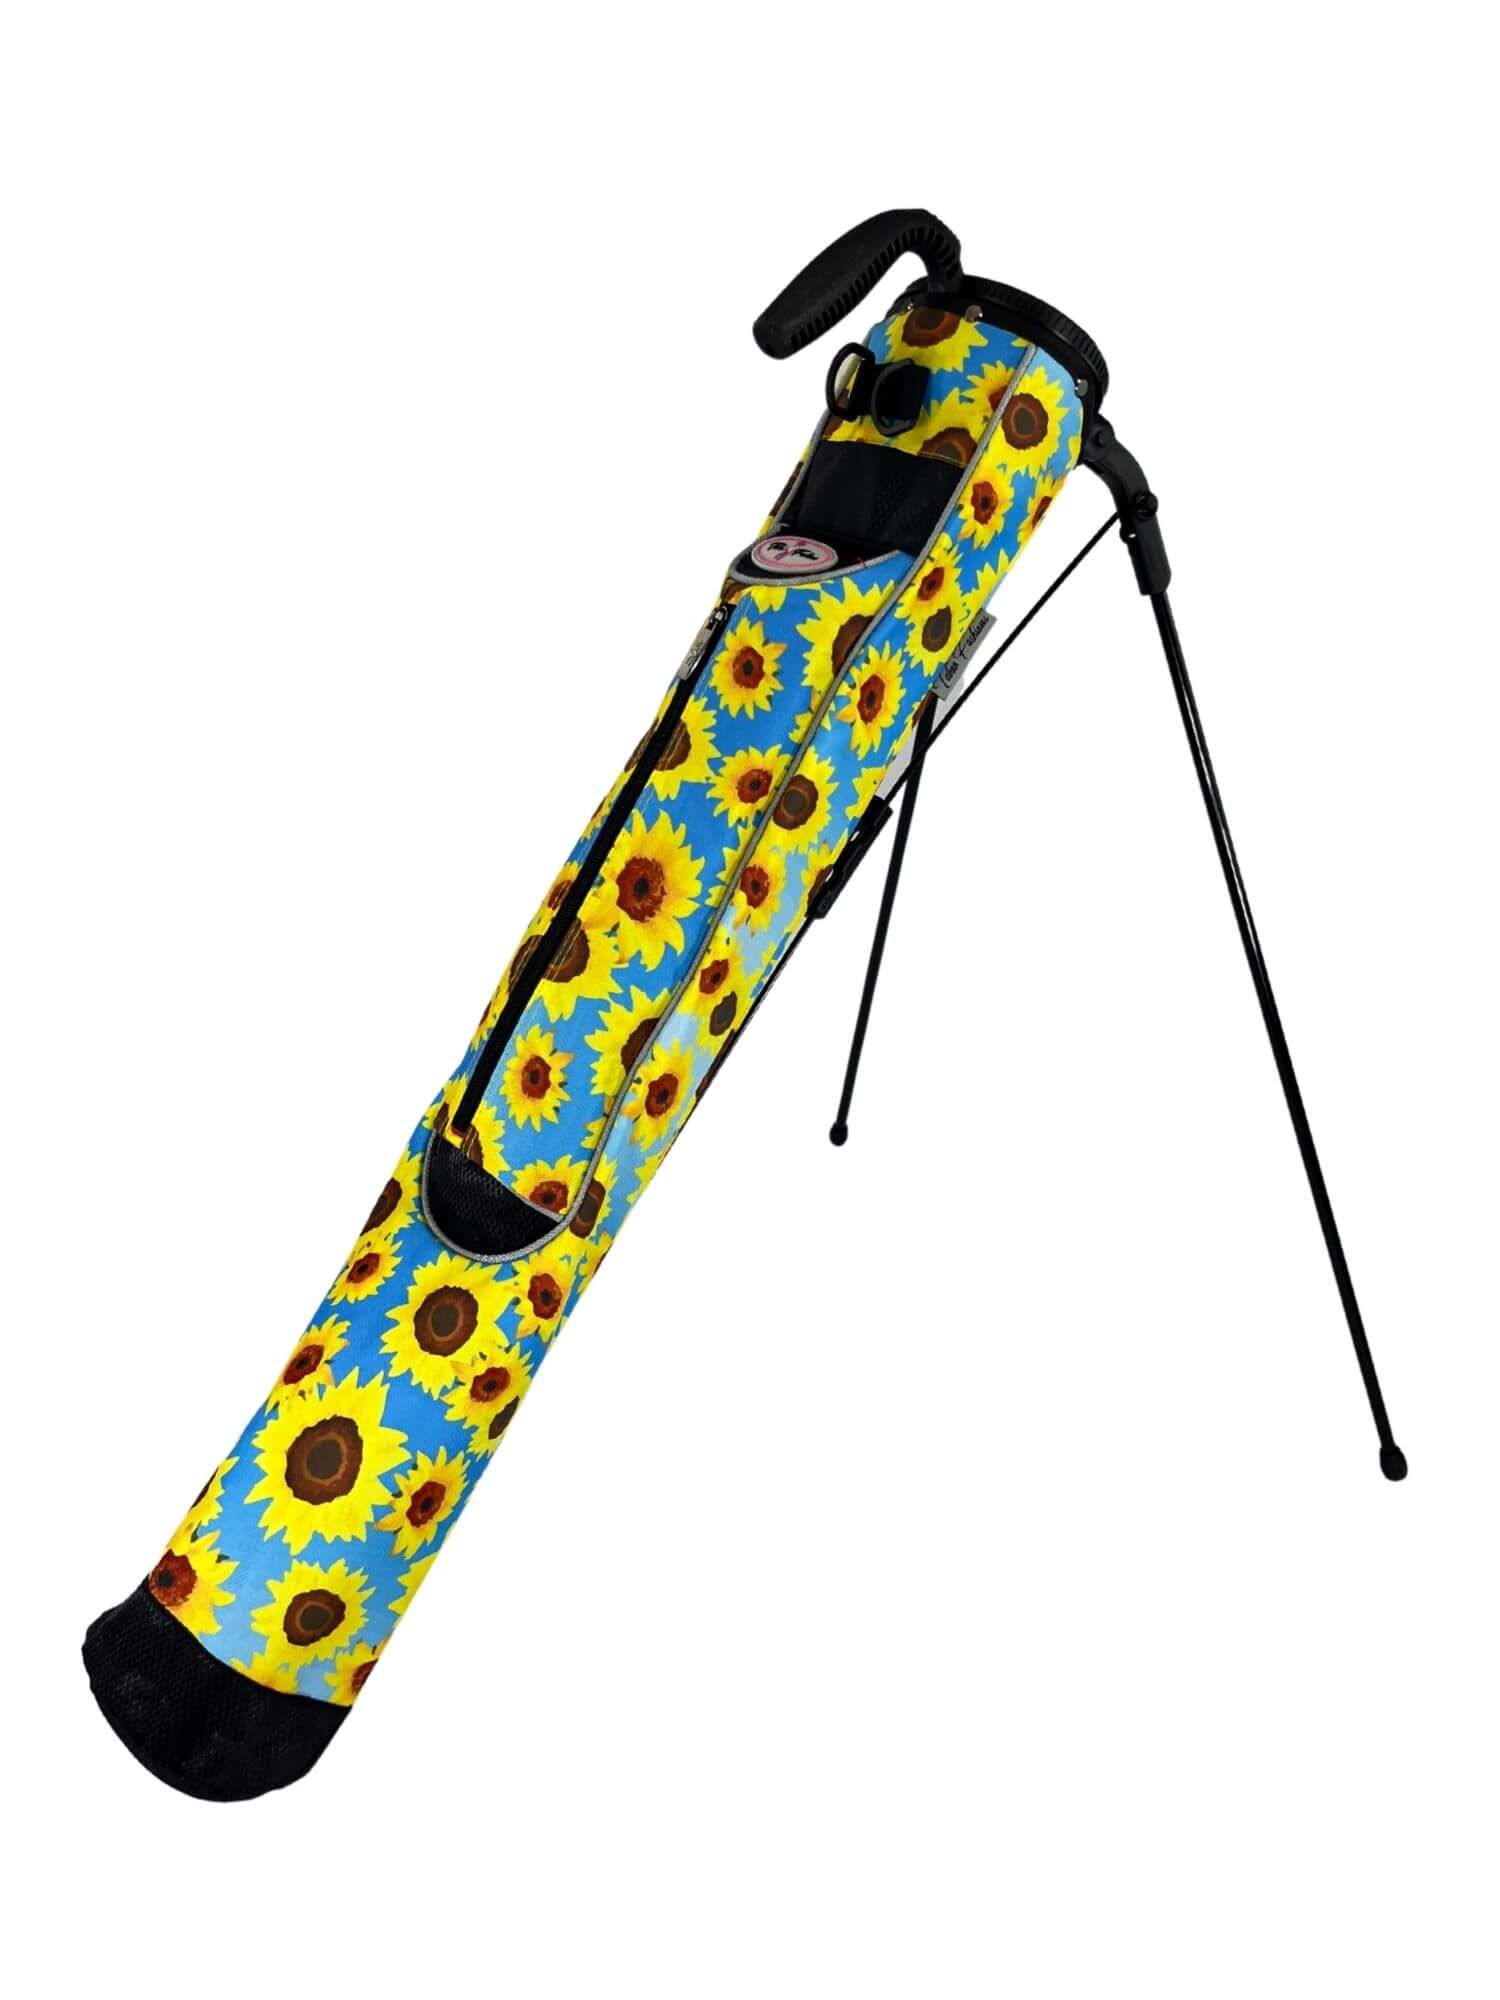 Taboo Fashions Range Golf Bag - Sultry Sunflowers